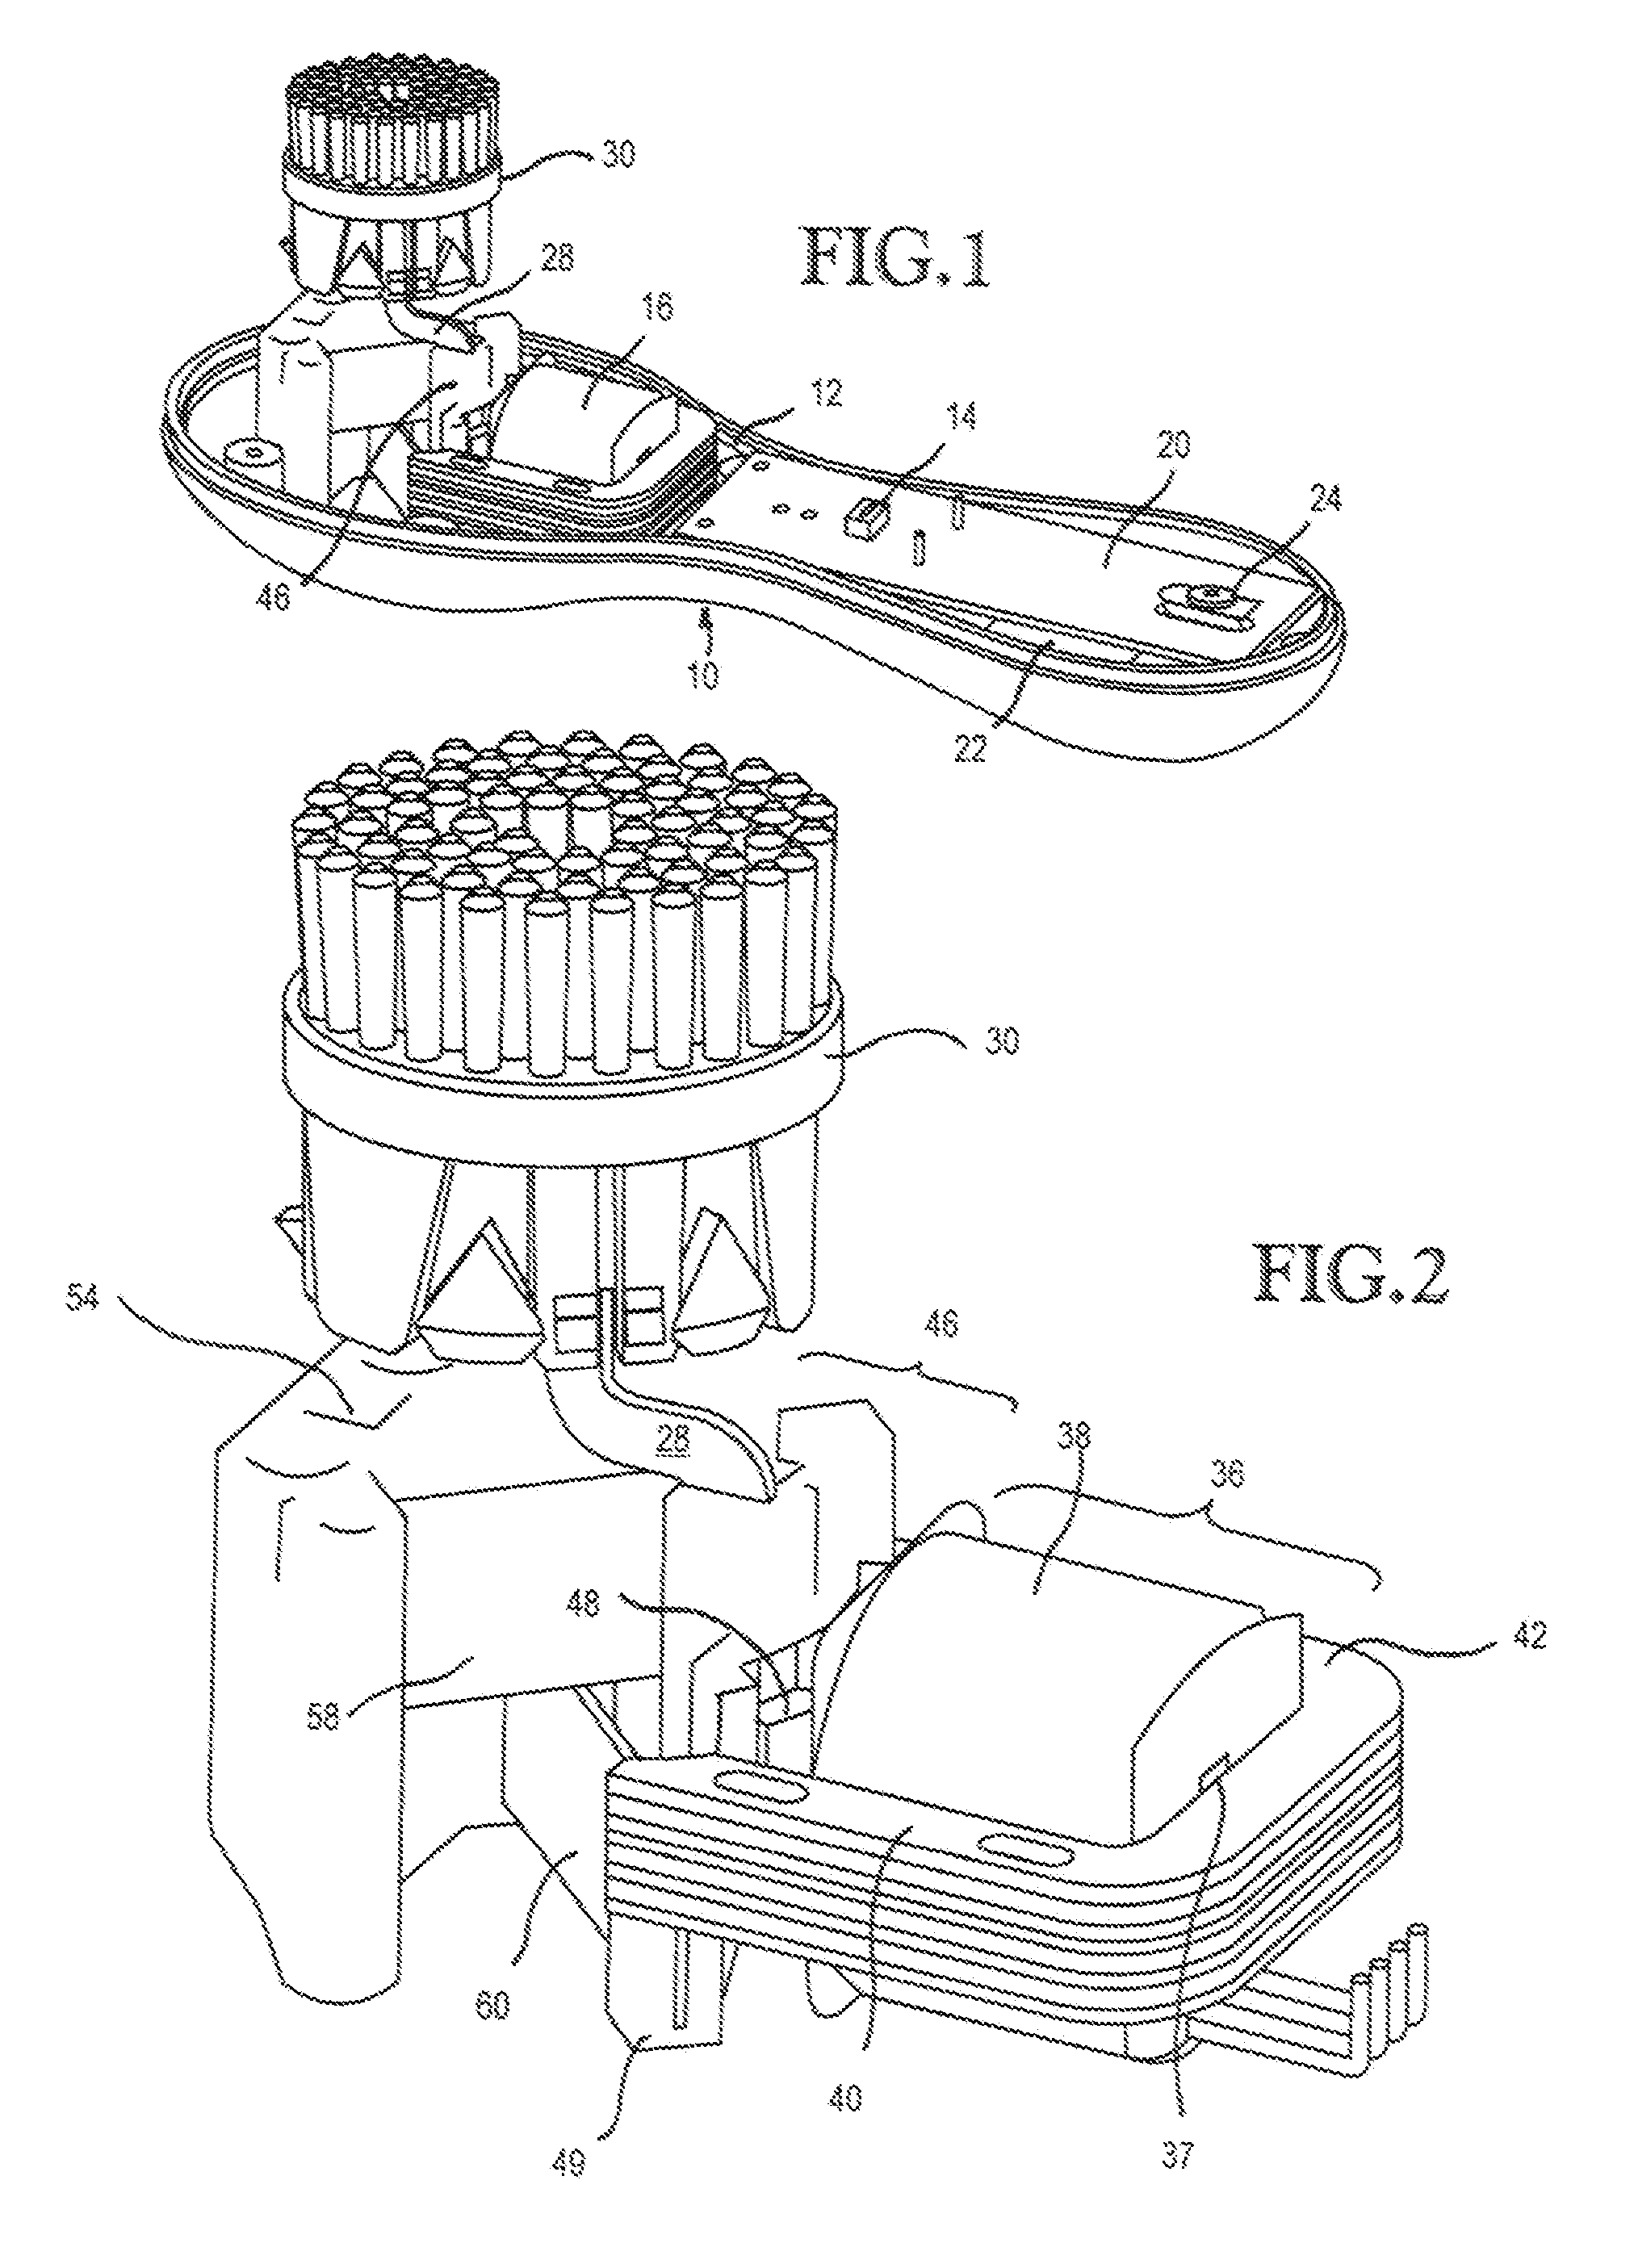 Oscillating motor for a personal care appliance